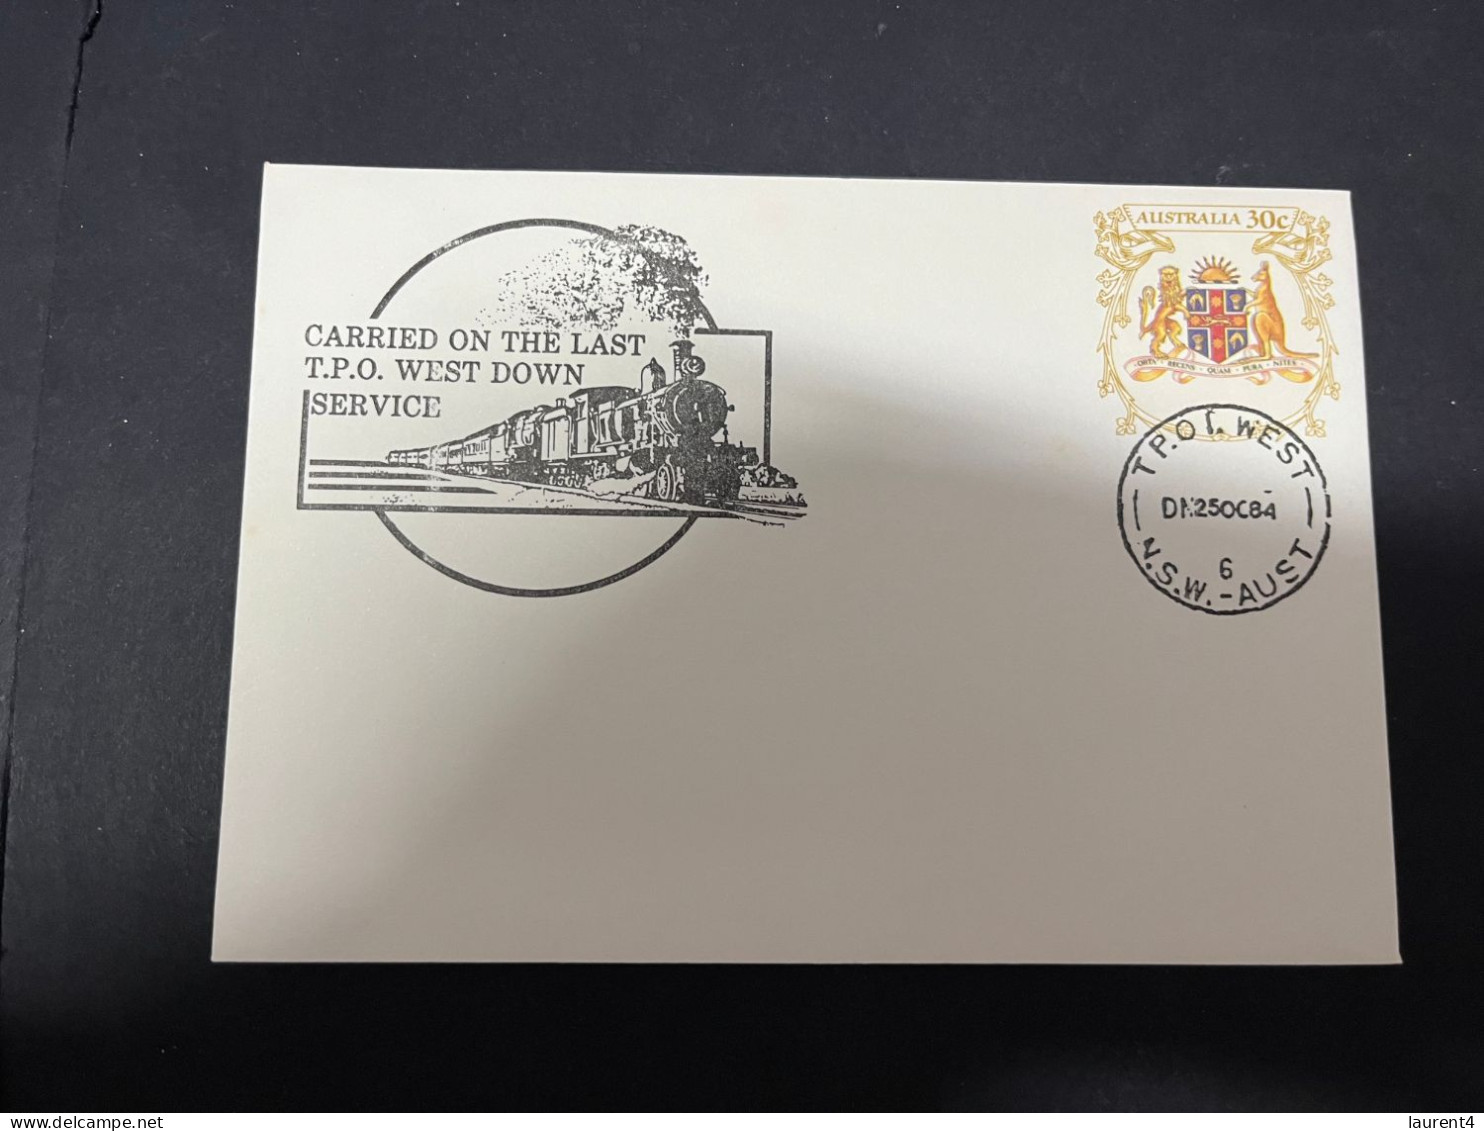 30-4-2023 (3 Z 29) Australia FDC (2 Covers) 1984 - Carried On The Last T.P.O. Service (mail Train) - Premiers Jours (FDC)